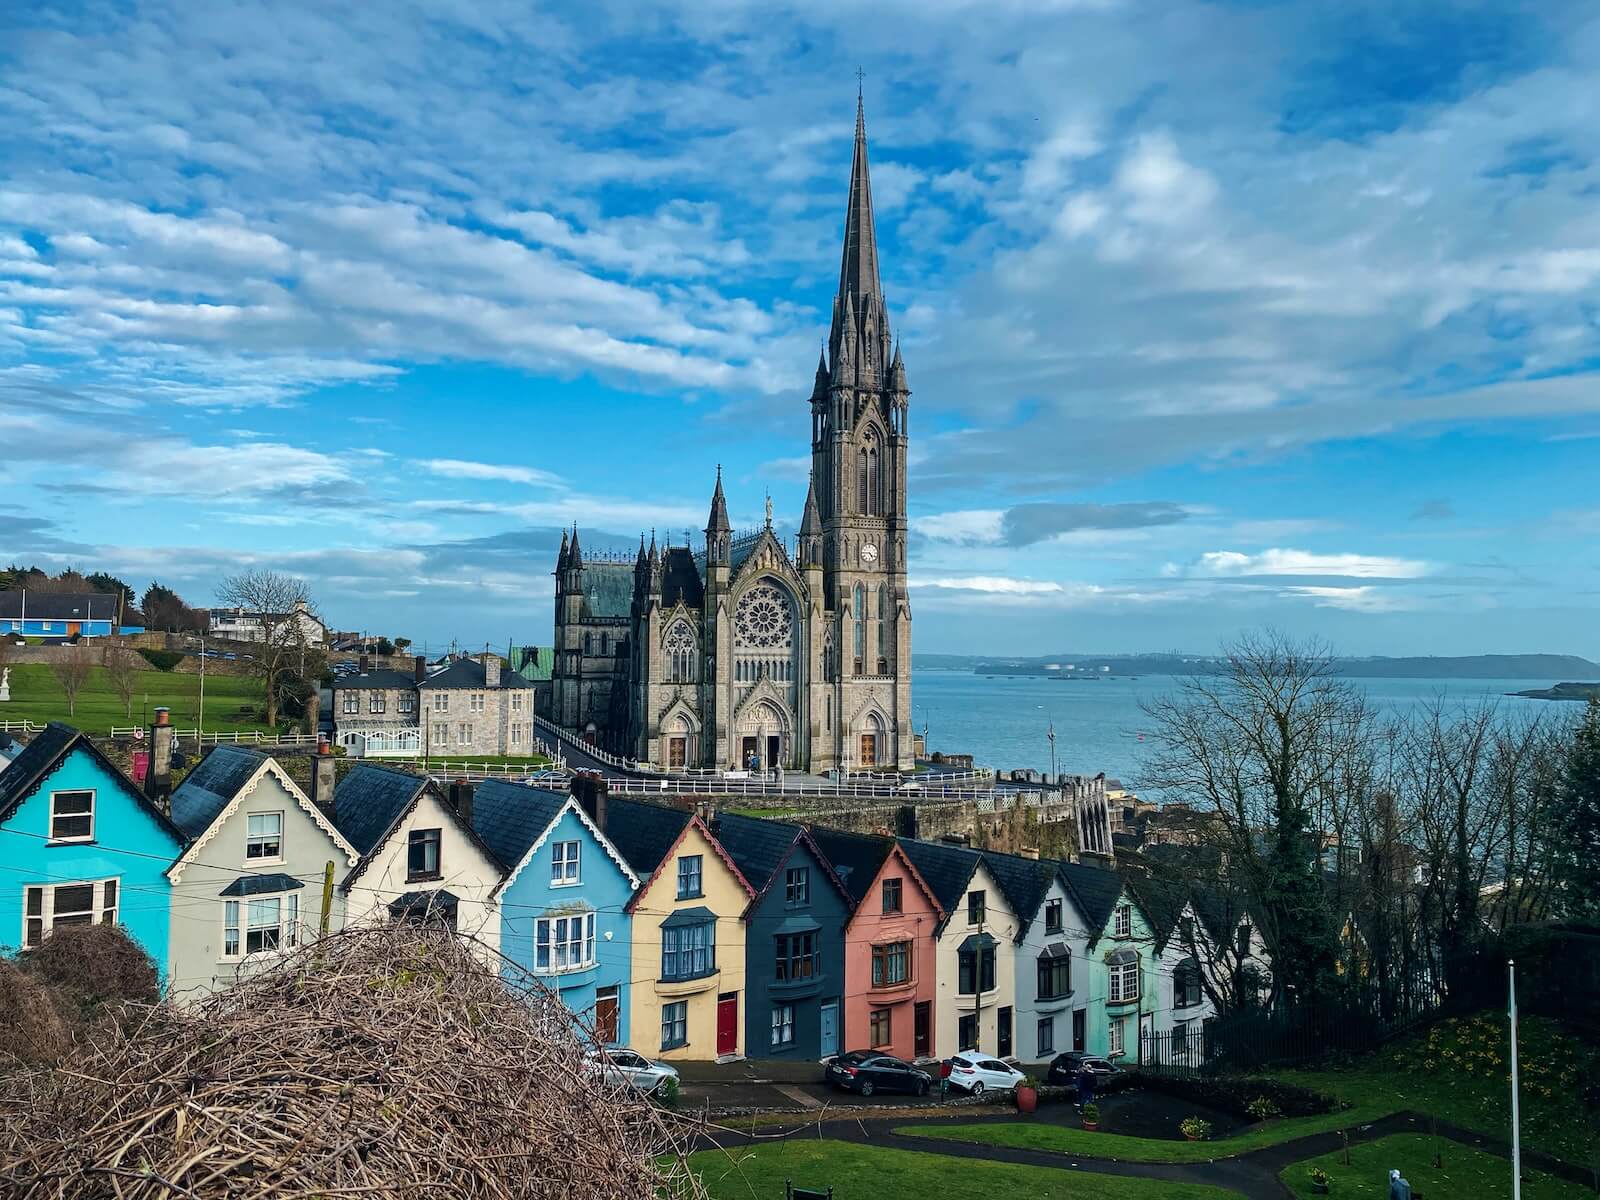 homes and a church in Cork, Ireland